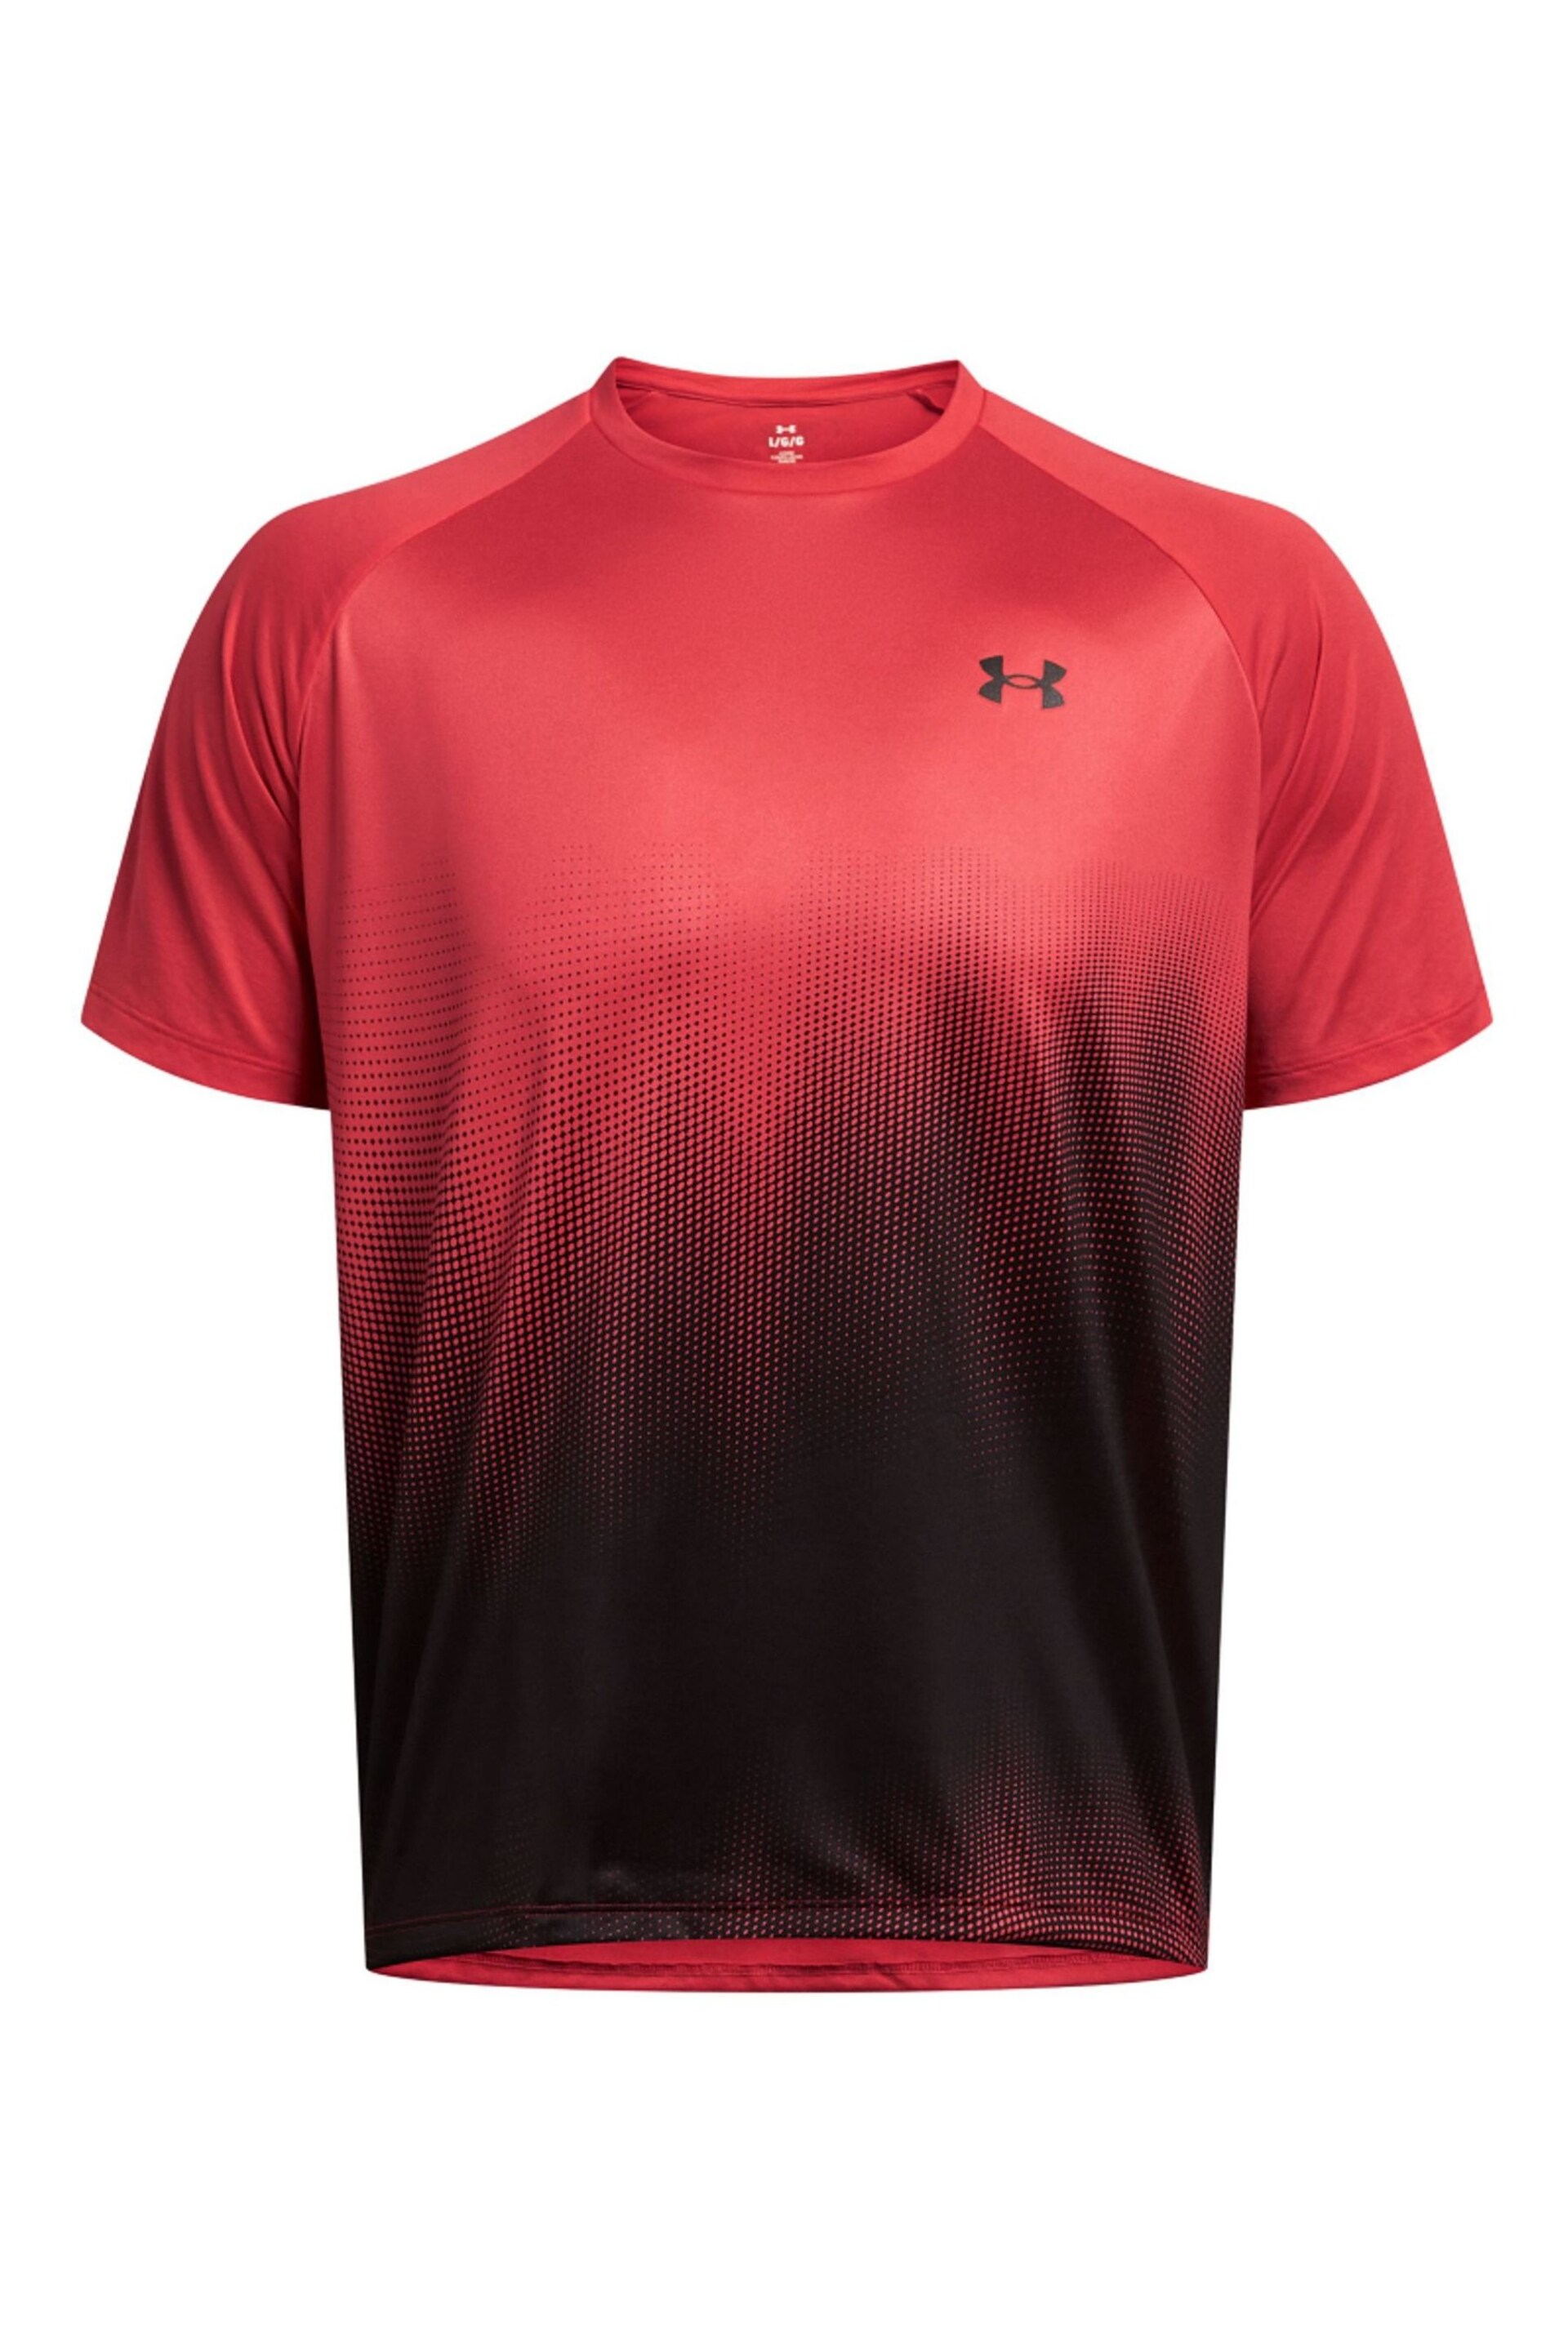 Under Armour Red Tech Fade Short Sleeve T-Shirt - Image 3 of 4